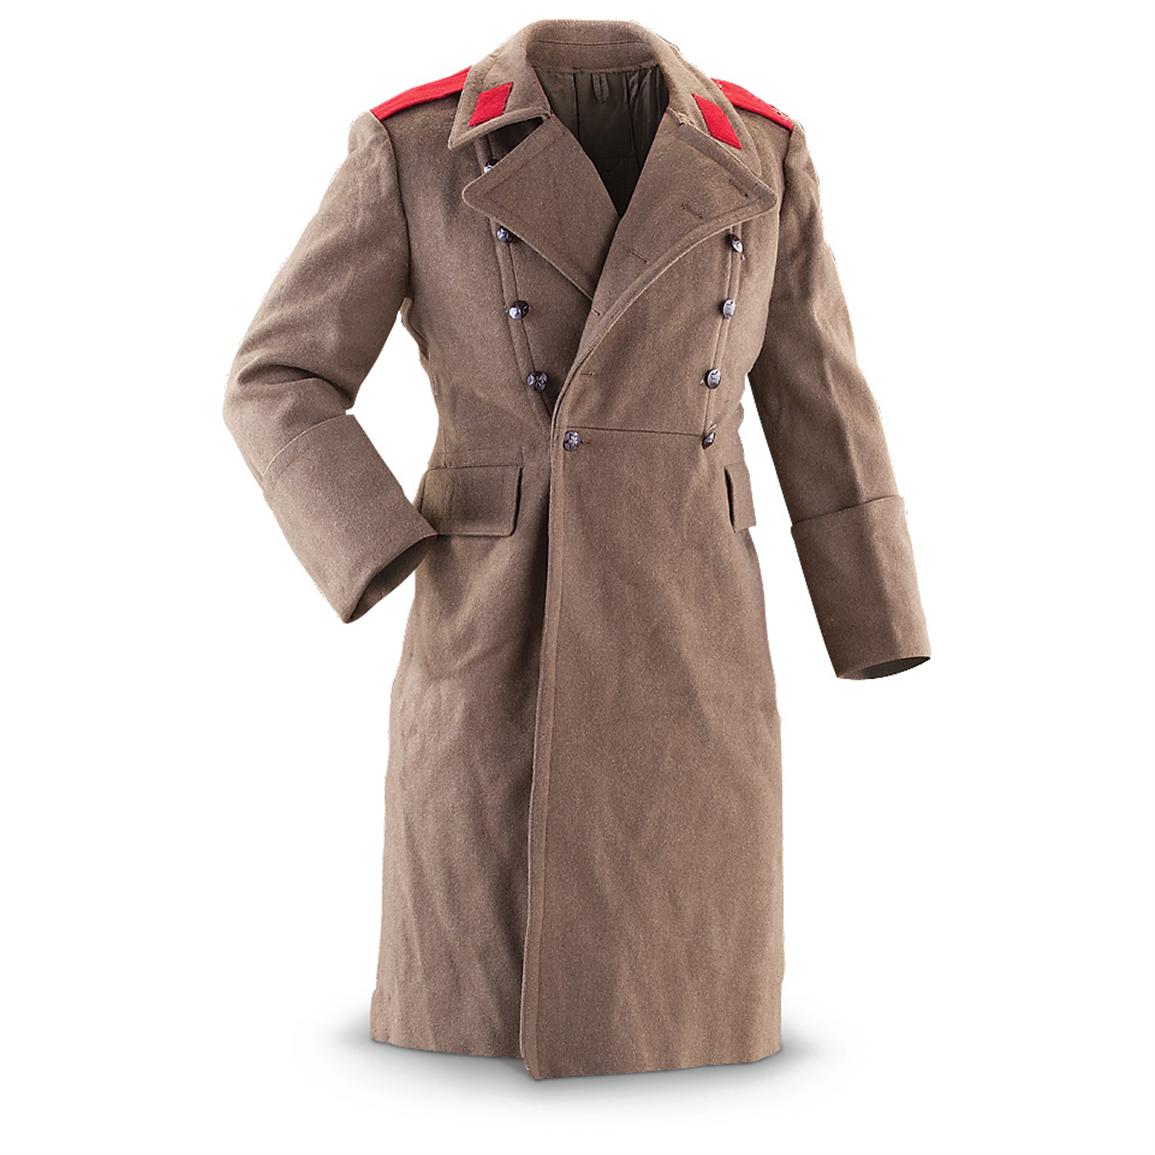 New Hungarian Military Surplus Wool Trench Coat, Olive Drab ...